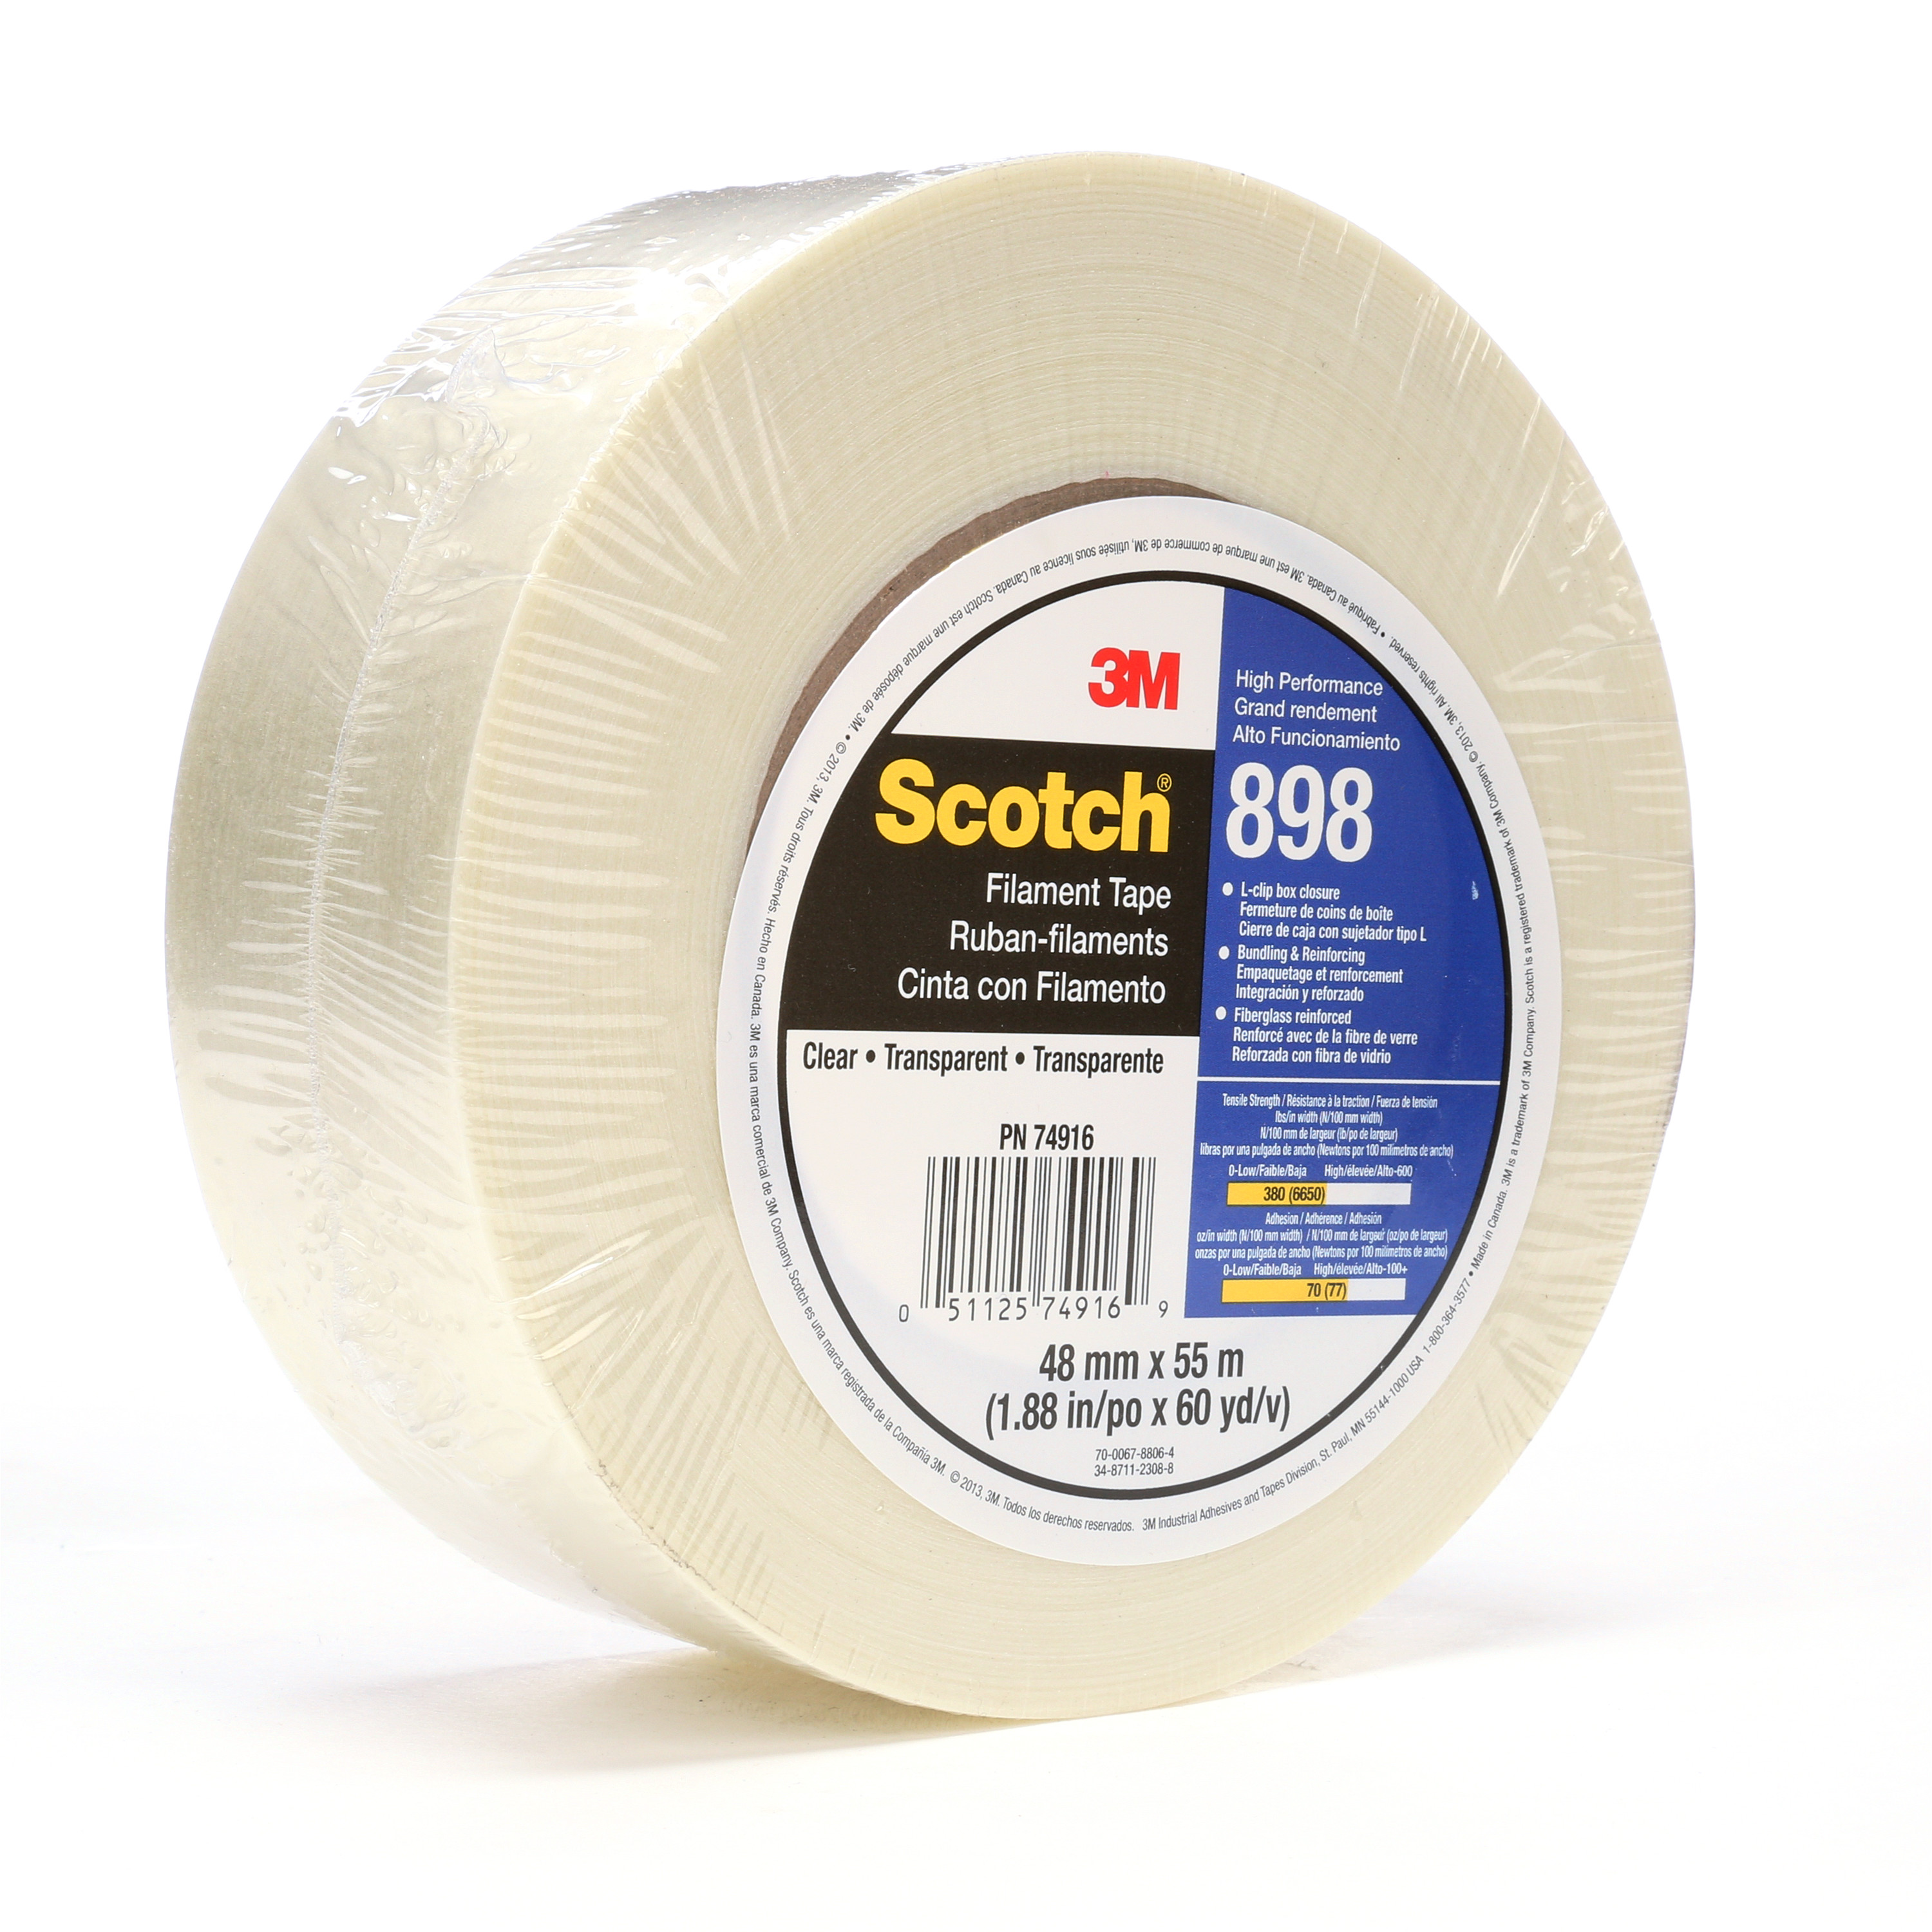 Scotch® Filament Tape 898, Clear, 48 mm x 55 m, 6.6 mil, 24 rolls per
case, Individually Wrapped Conveniently Packaged